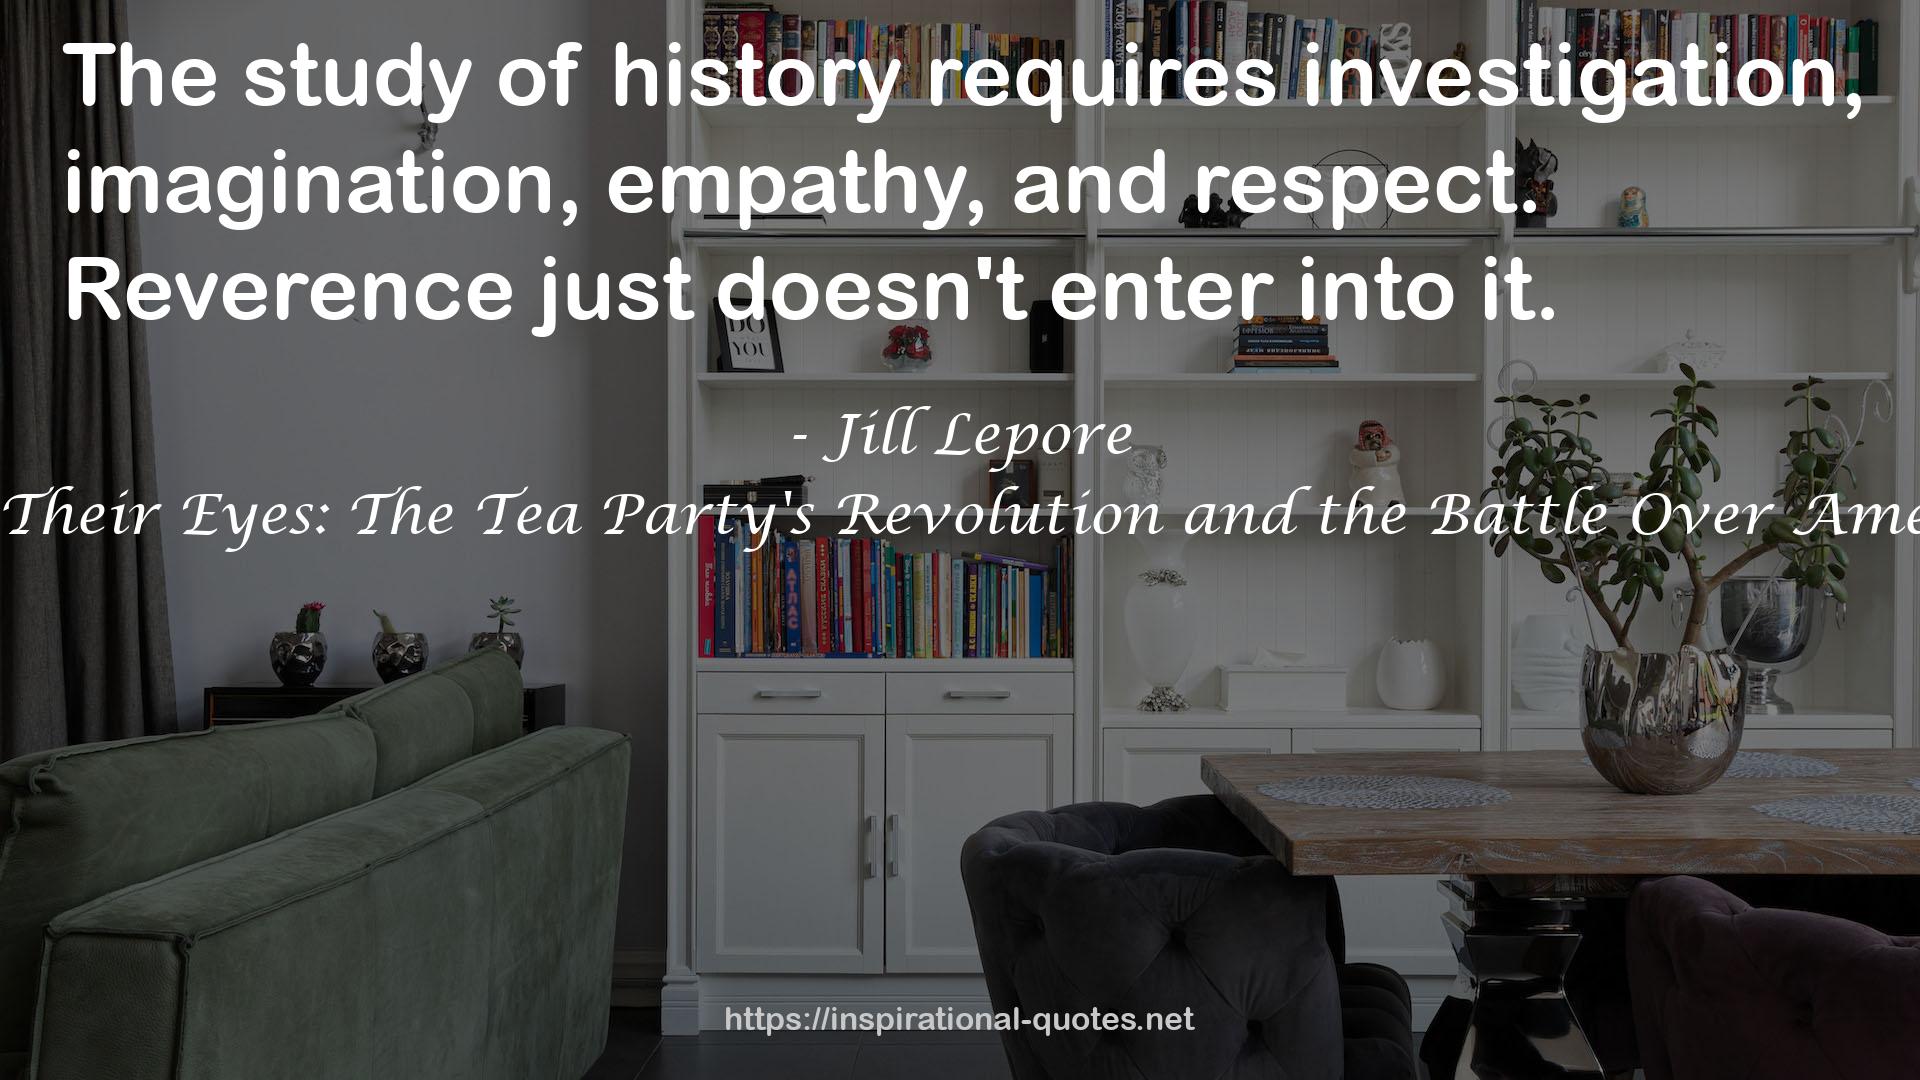 The Whites of Their Eyes: The Tea Party's Revolution and the Battle Over American History QUOTES